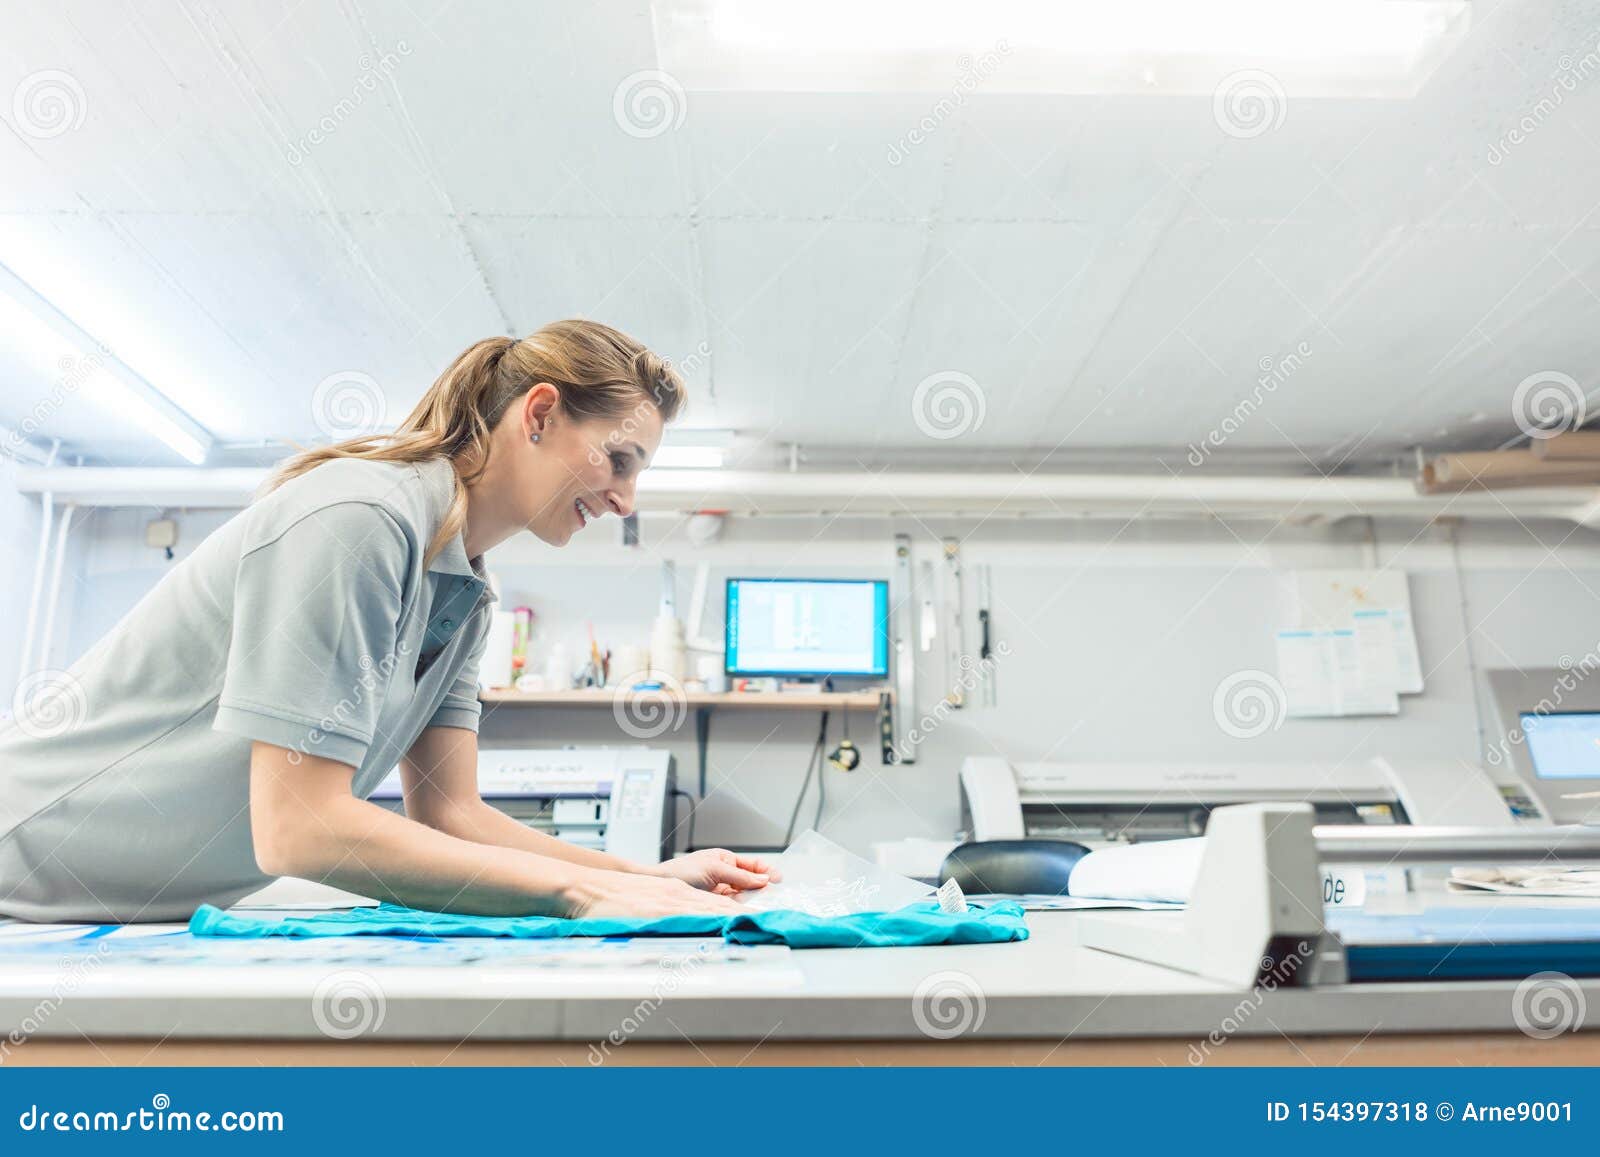 Woman Flock Printing a T-shirt As Promotional Item Stock Photo - Image